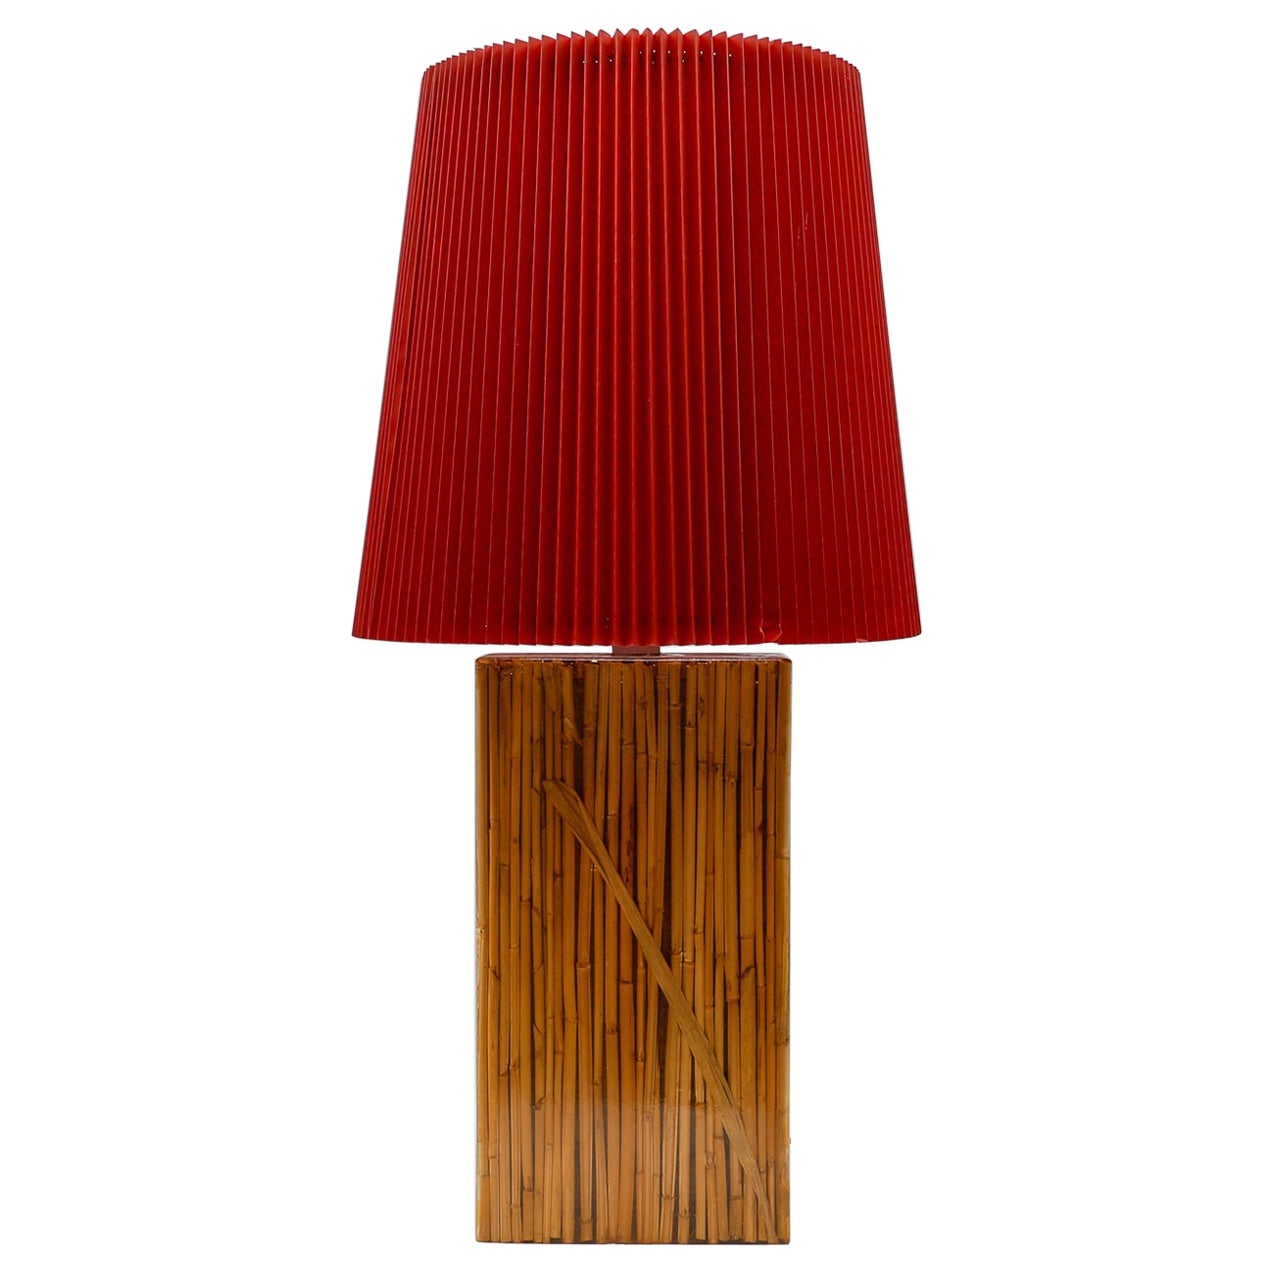 Large Riccardo Marzi Bamboo Resin Table Lamp, 1970s Italy For Sale